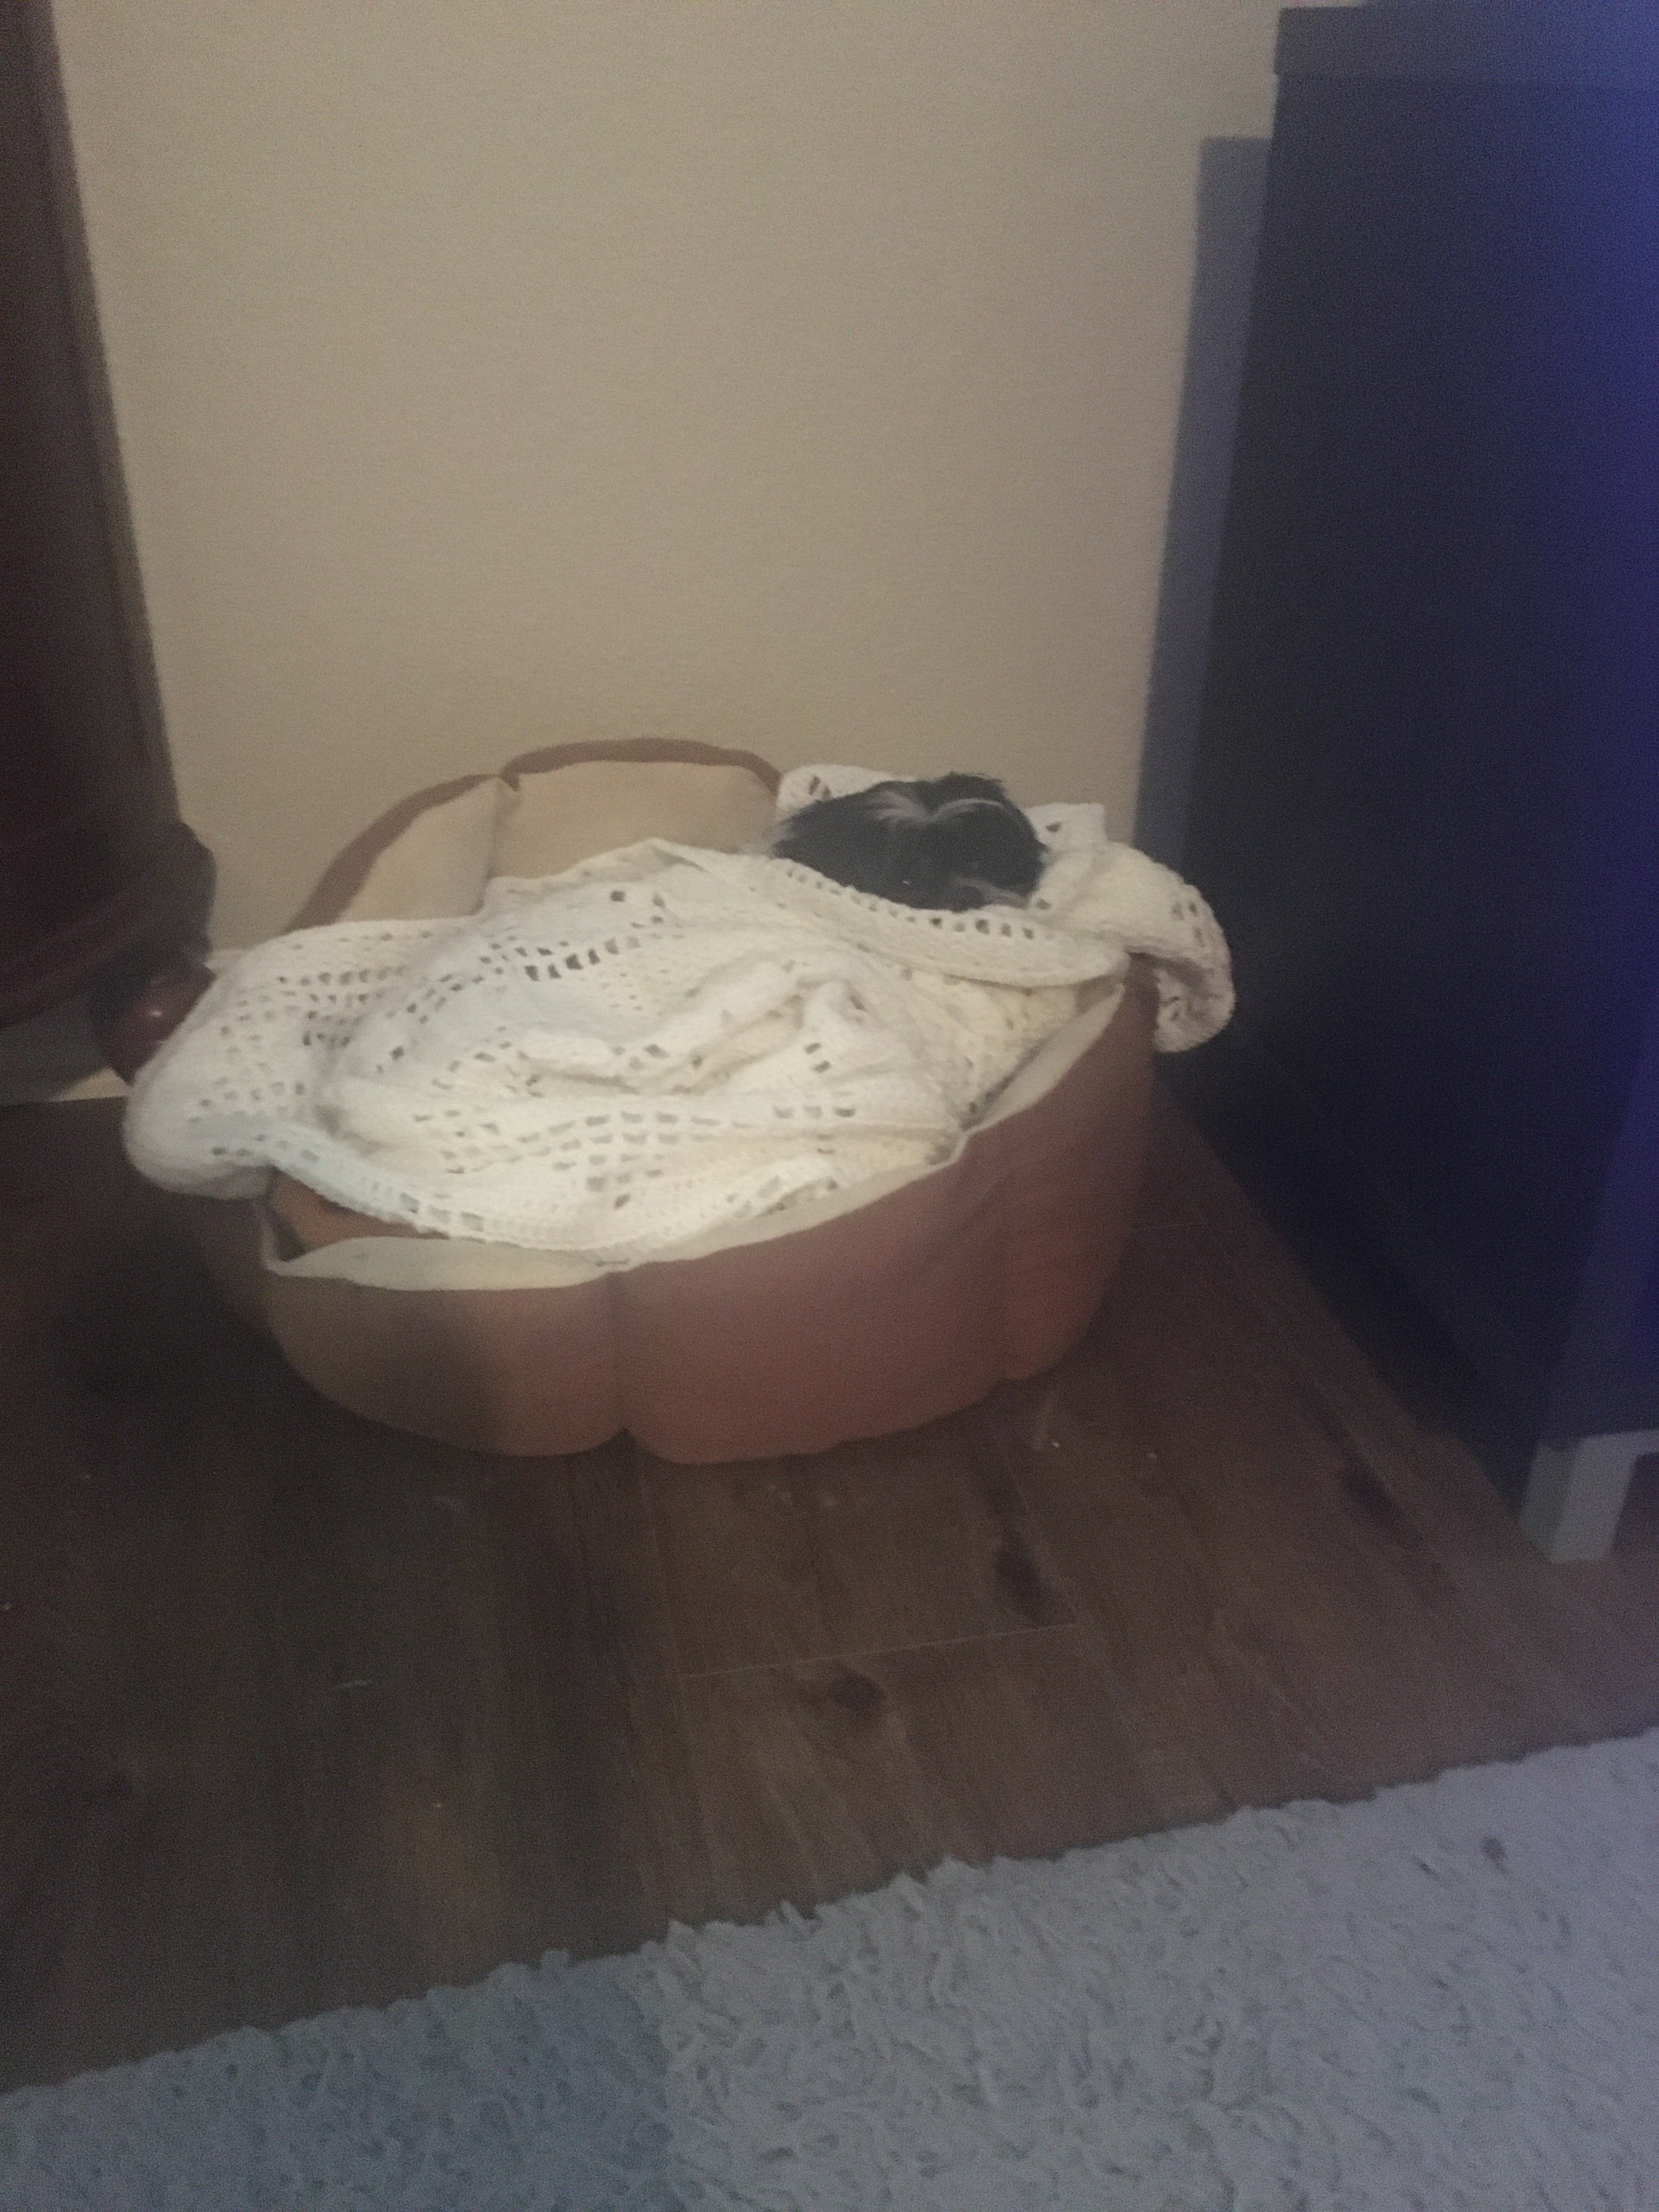 shih tzu in her bed, covered entirely by a white blanket except for a small black spot where her head is visible.